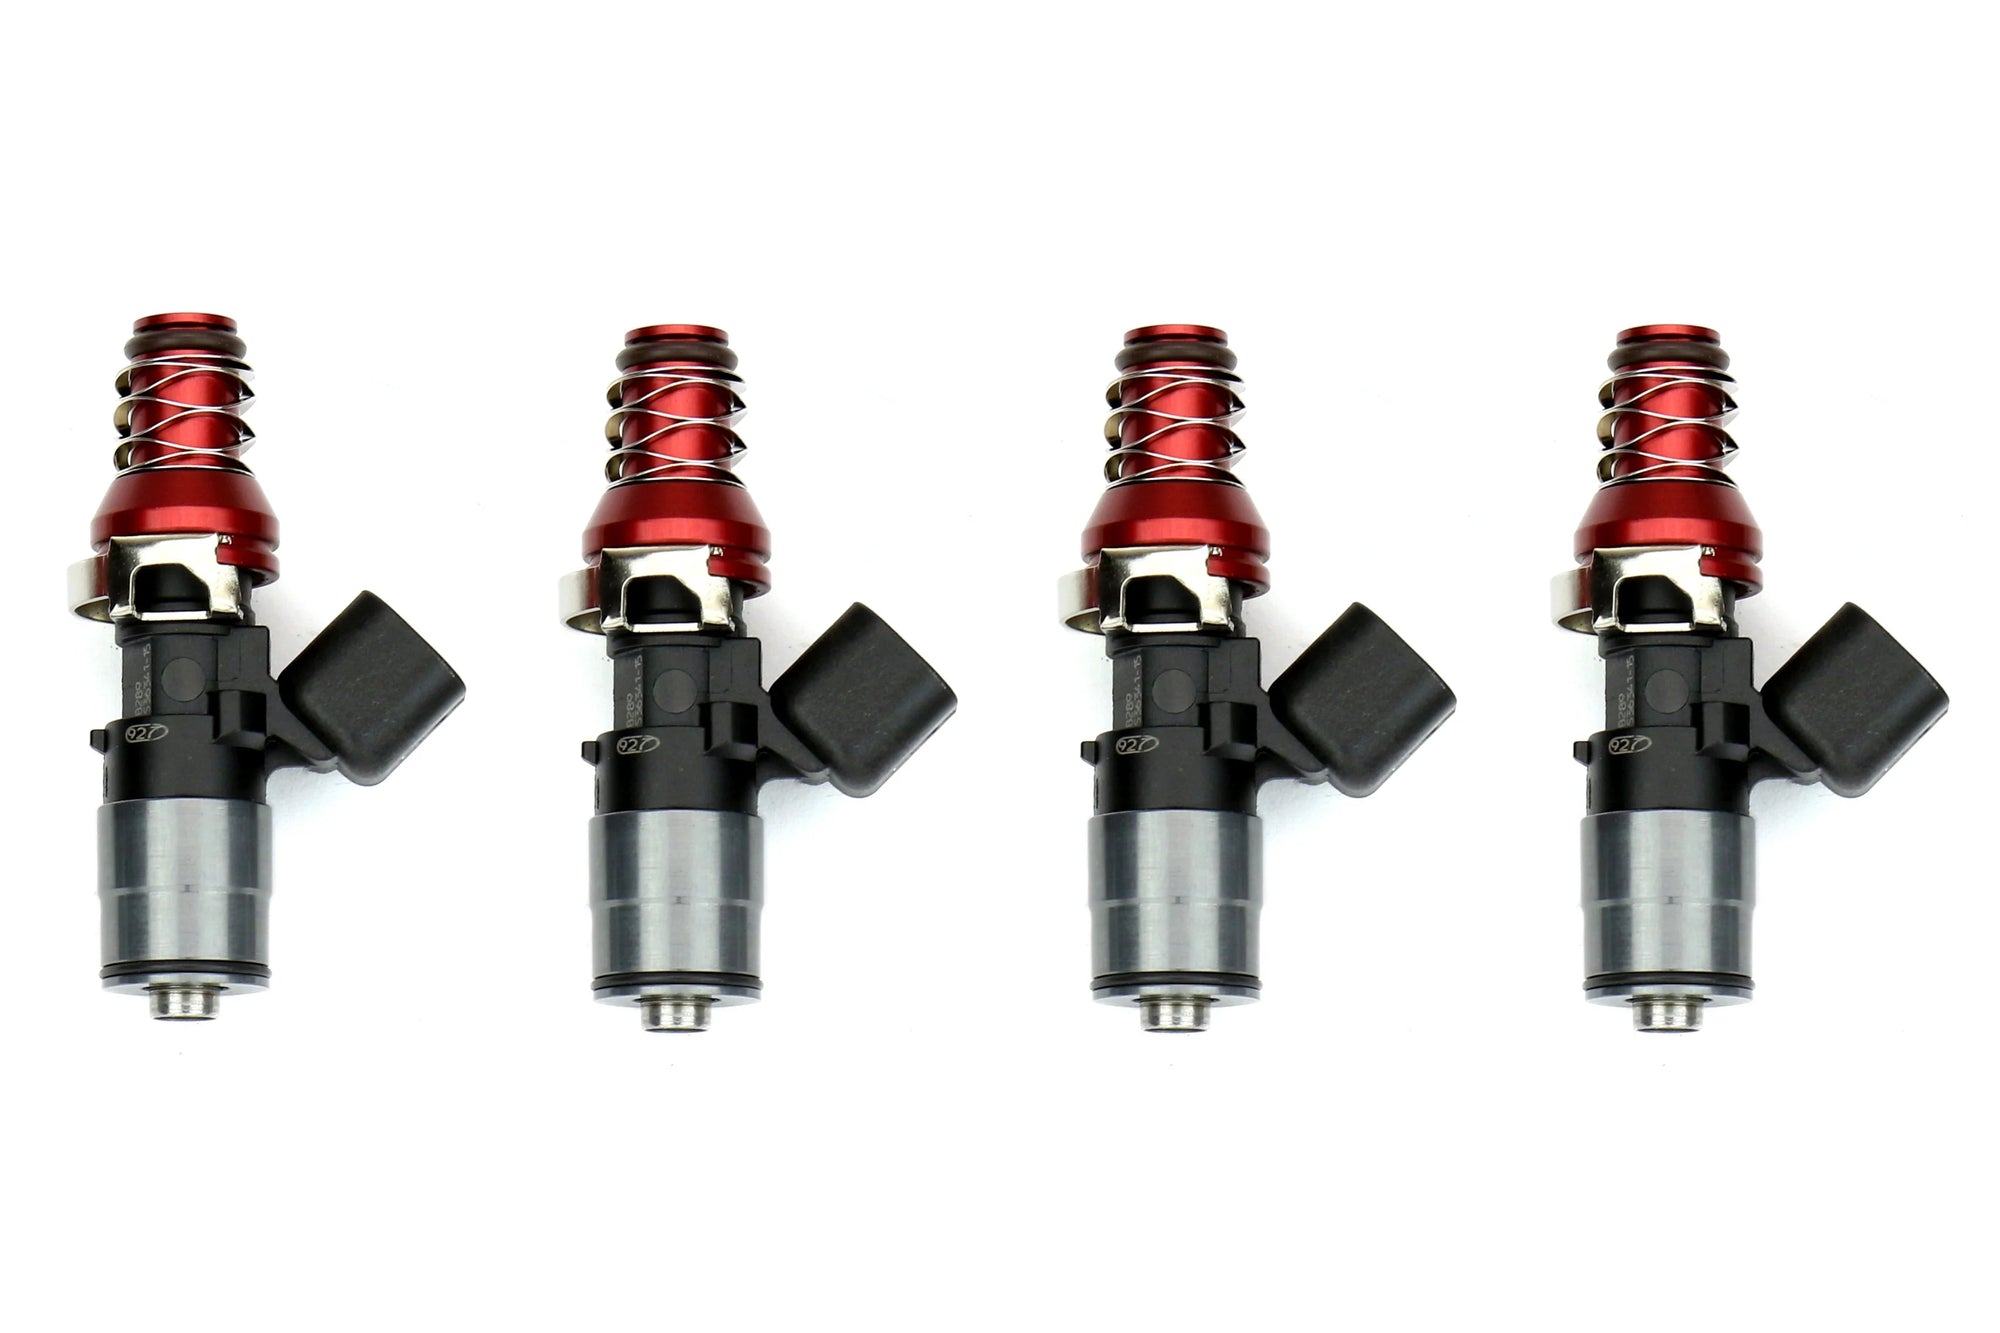 Injector Dynamics 1050-XDS Series Injectors - BMW Applications